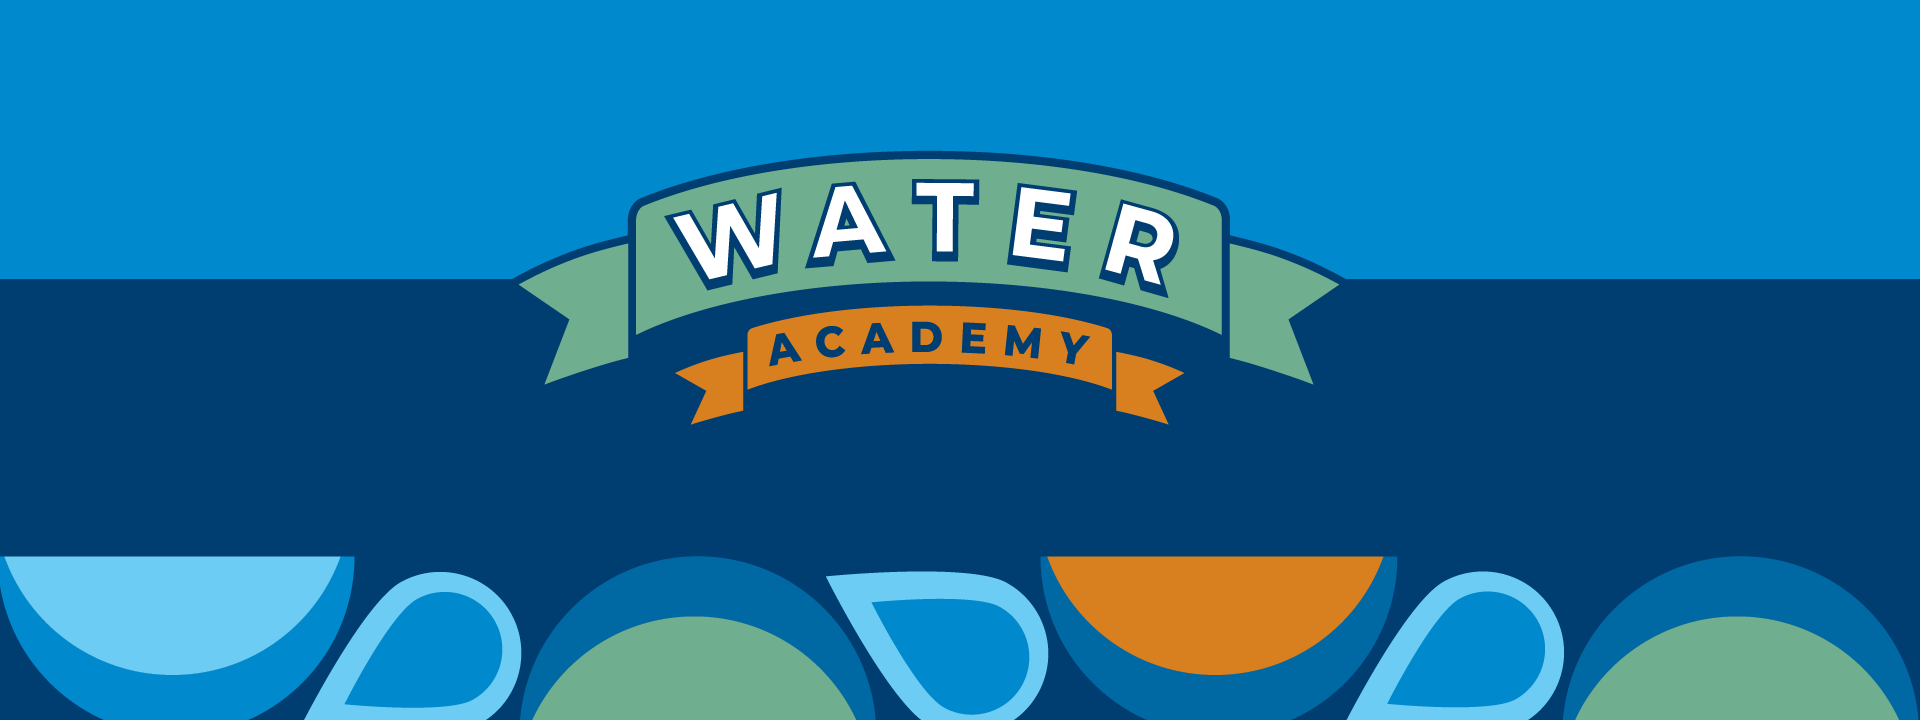 Water Academy Banner Image